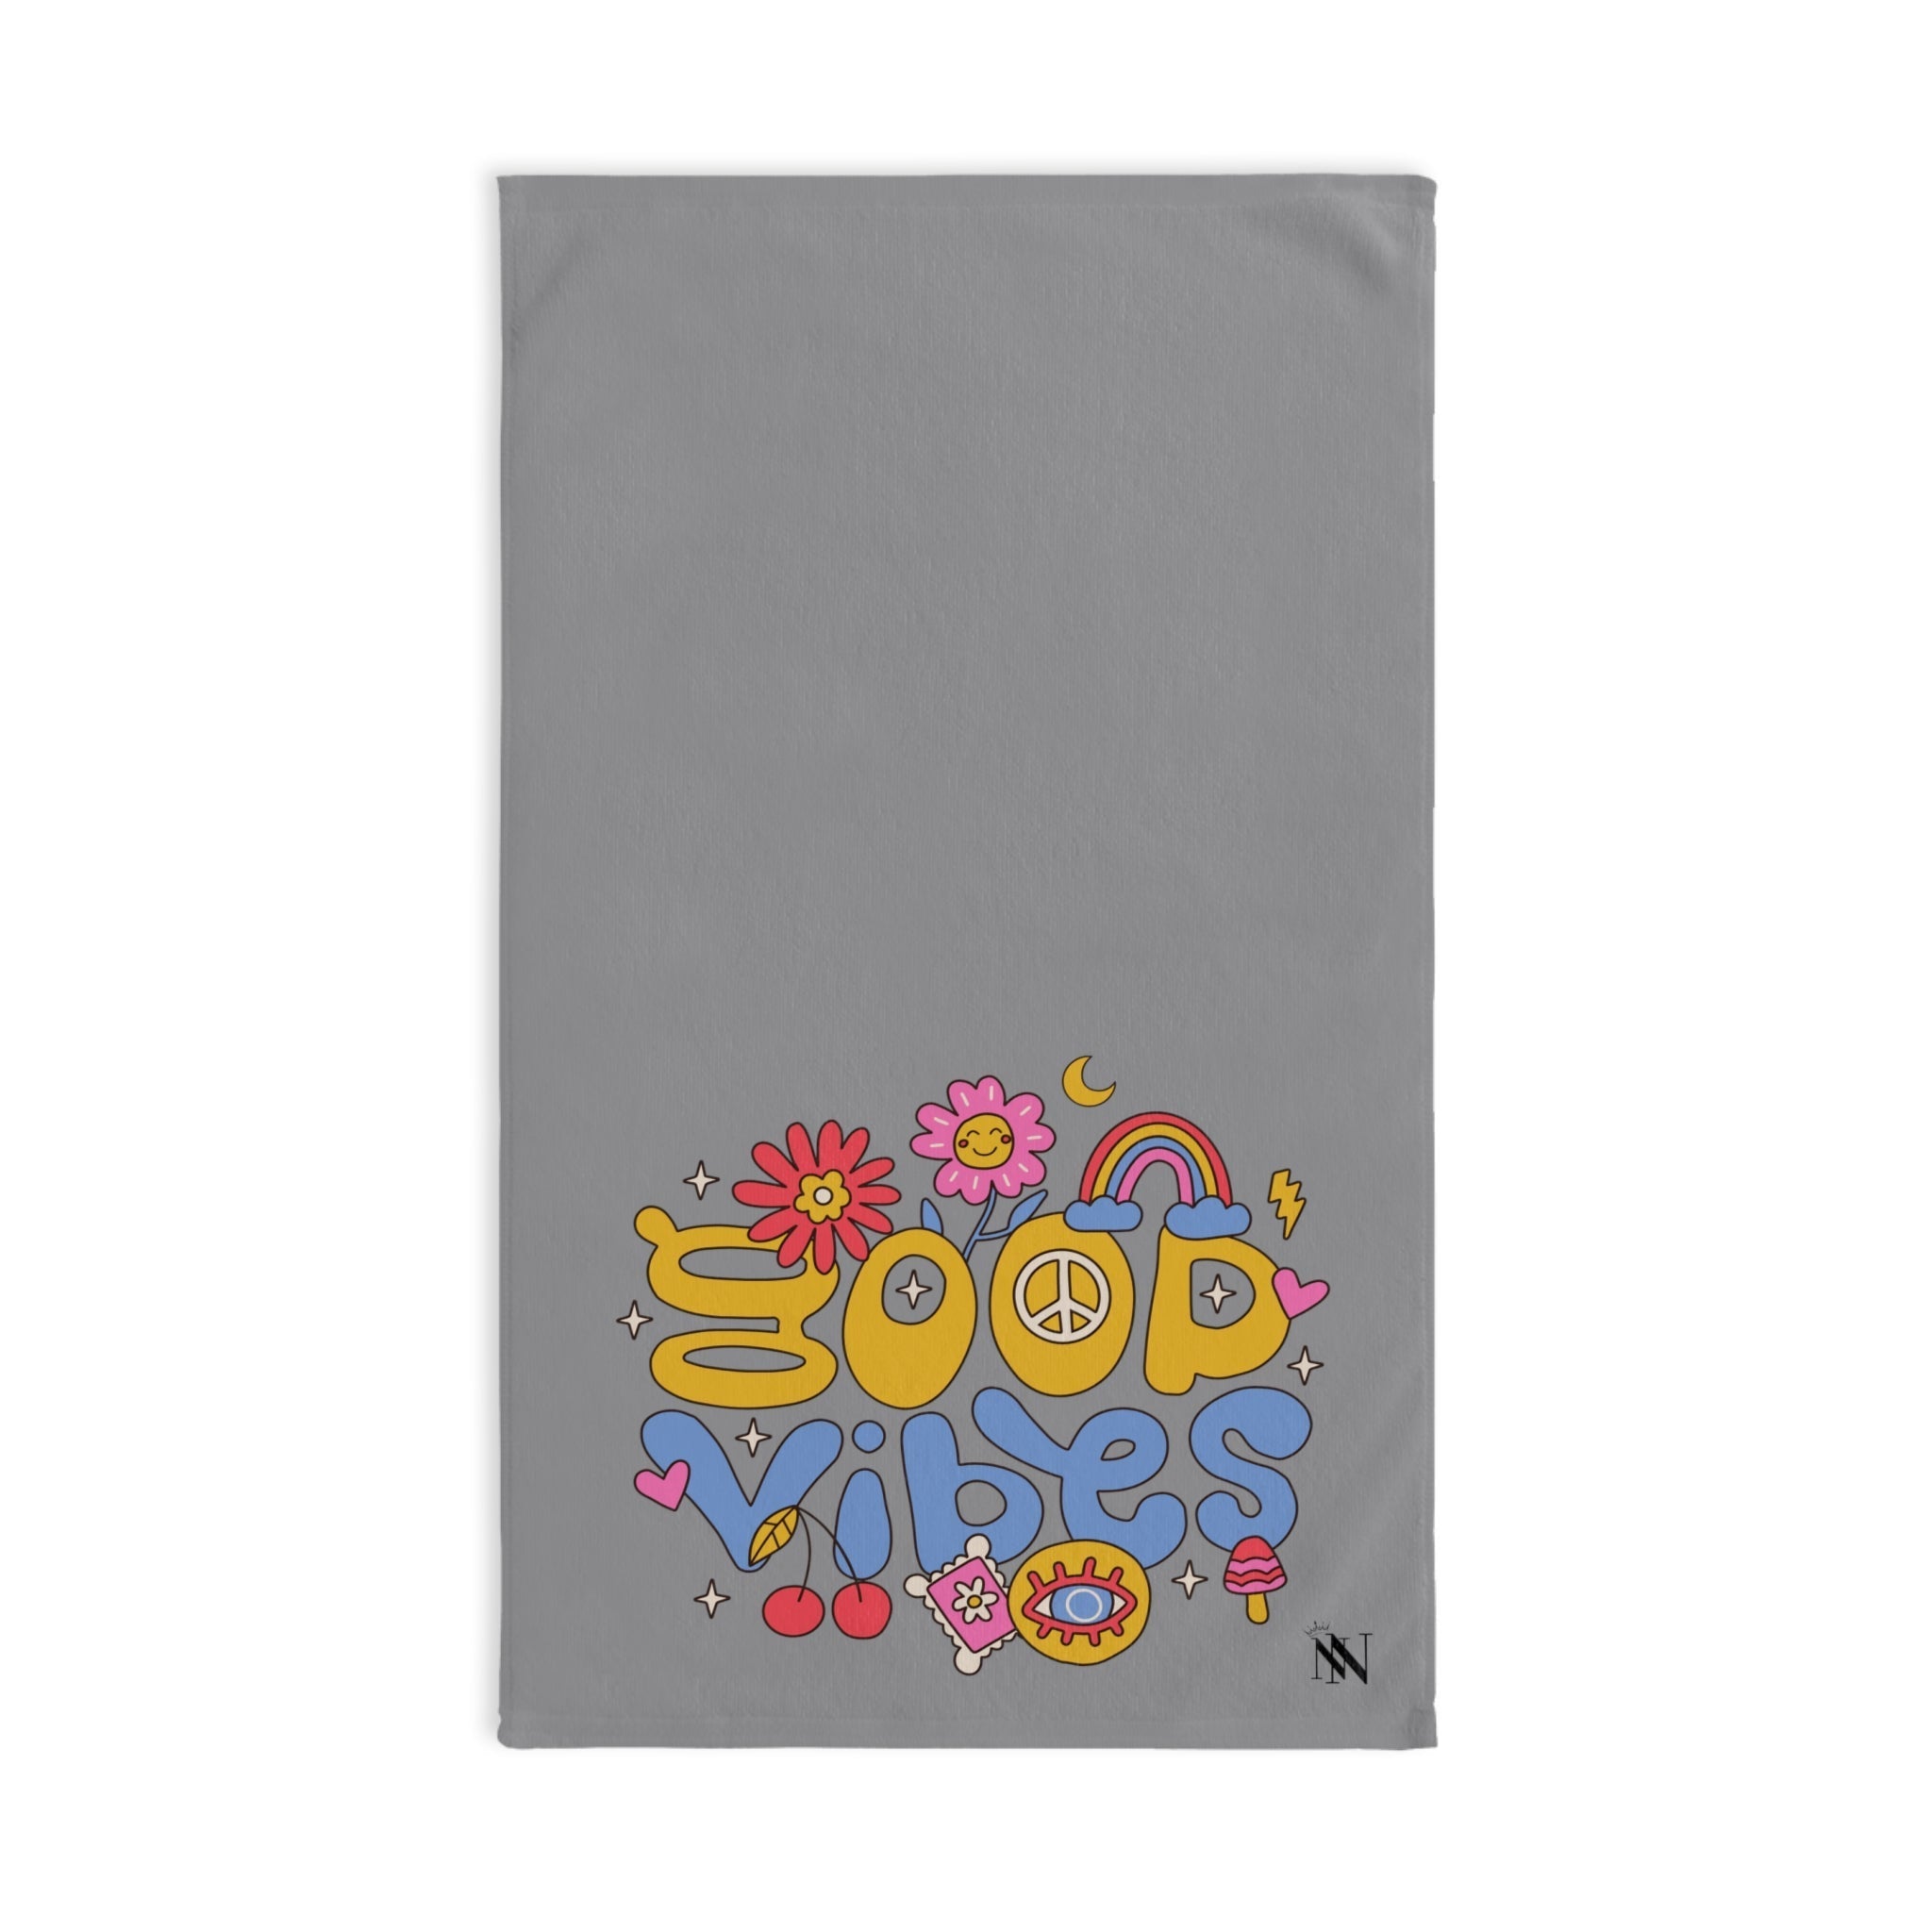 Hippie Vibes Good Grey | Anniversary Wedding, Christmas, Valentines Day, Birthday Gifts for Him, Her, Romantic Gifts for Wife, Girlfriend, Couples Gifts for Boyfriend, Husband NECTAR NAPKINS